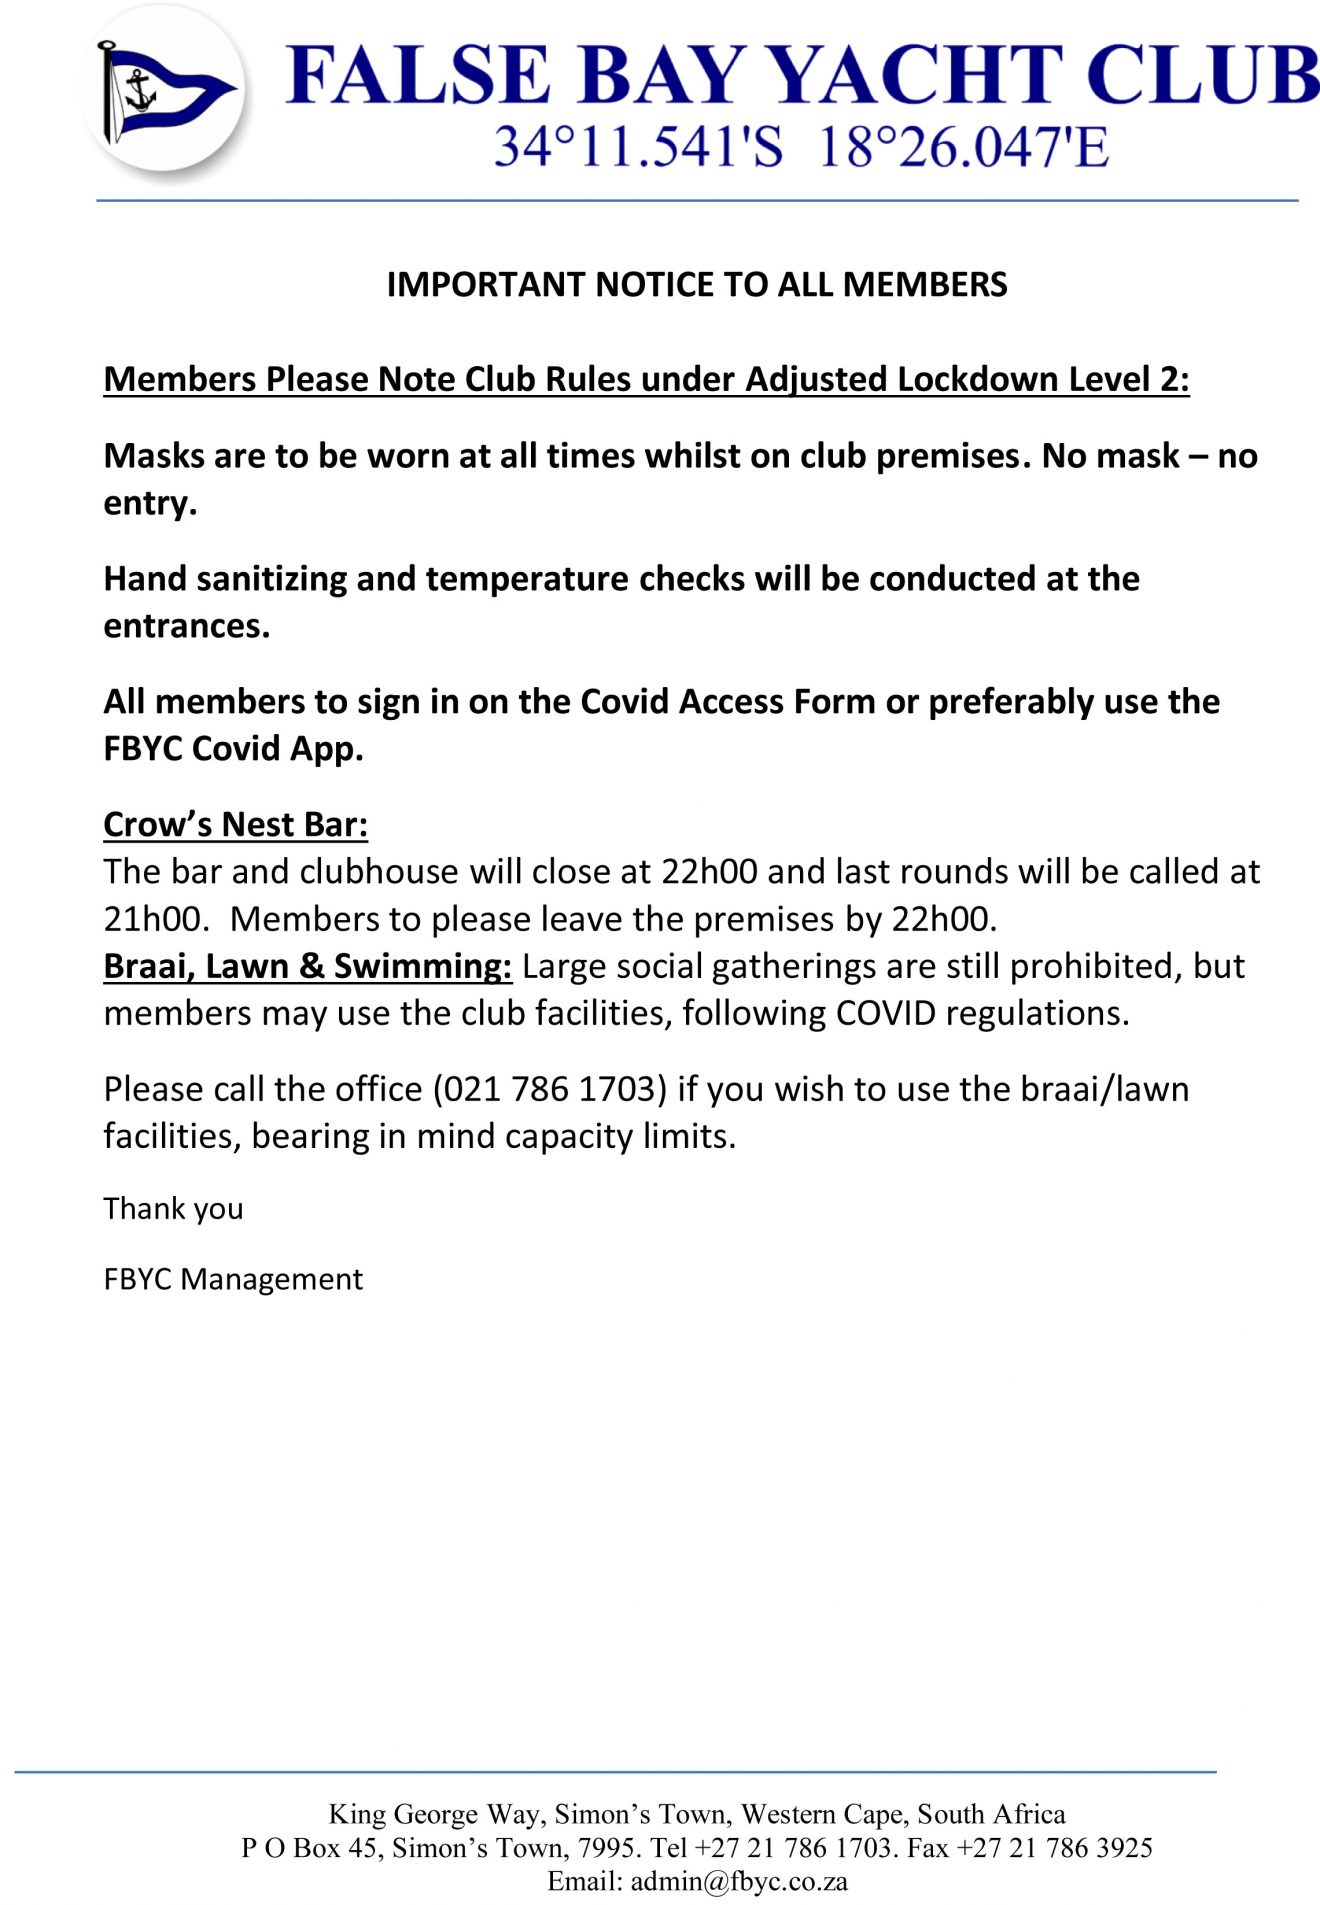 NOTICE TO MEMBERS 31 May 2021